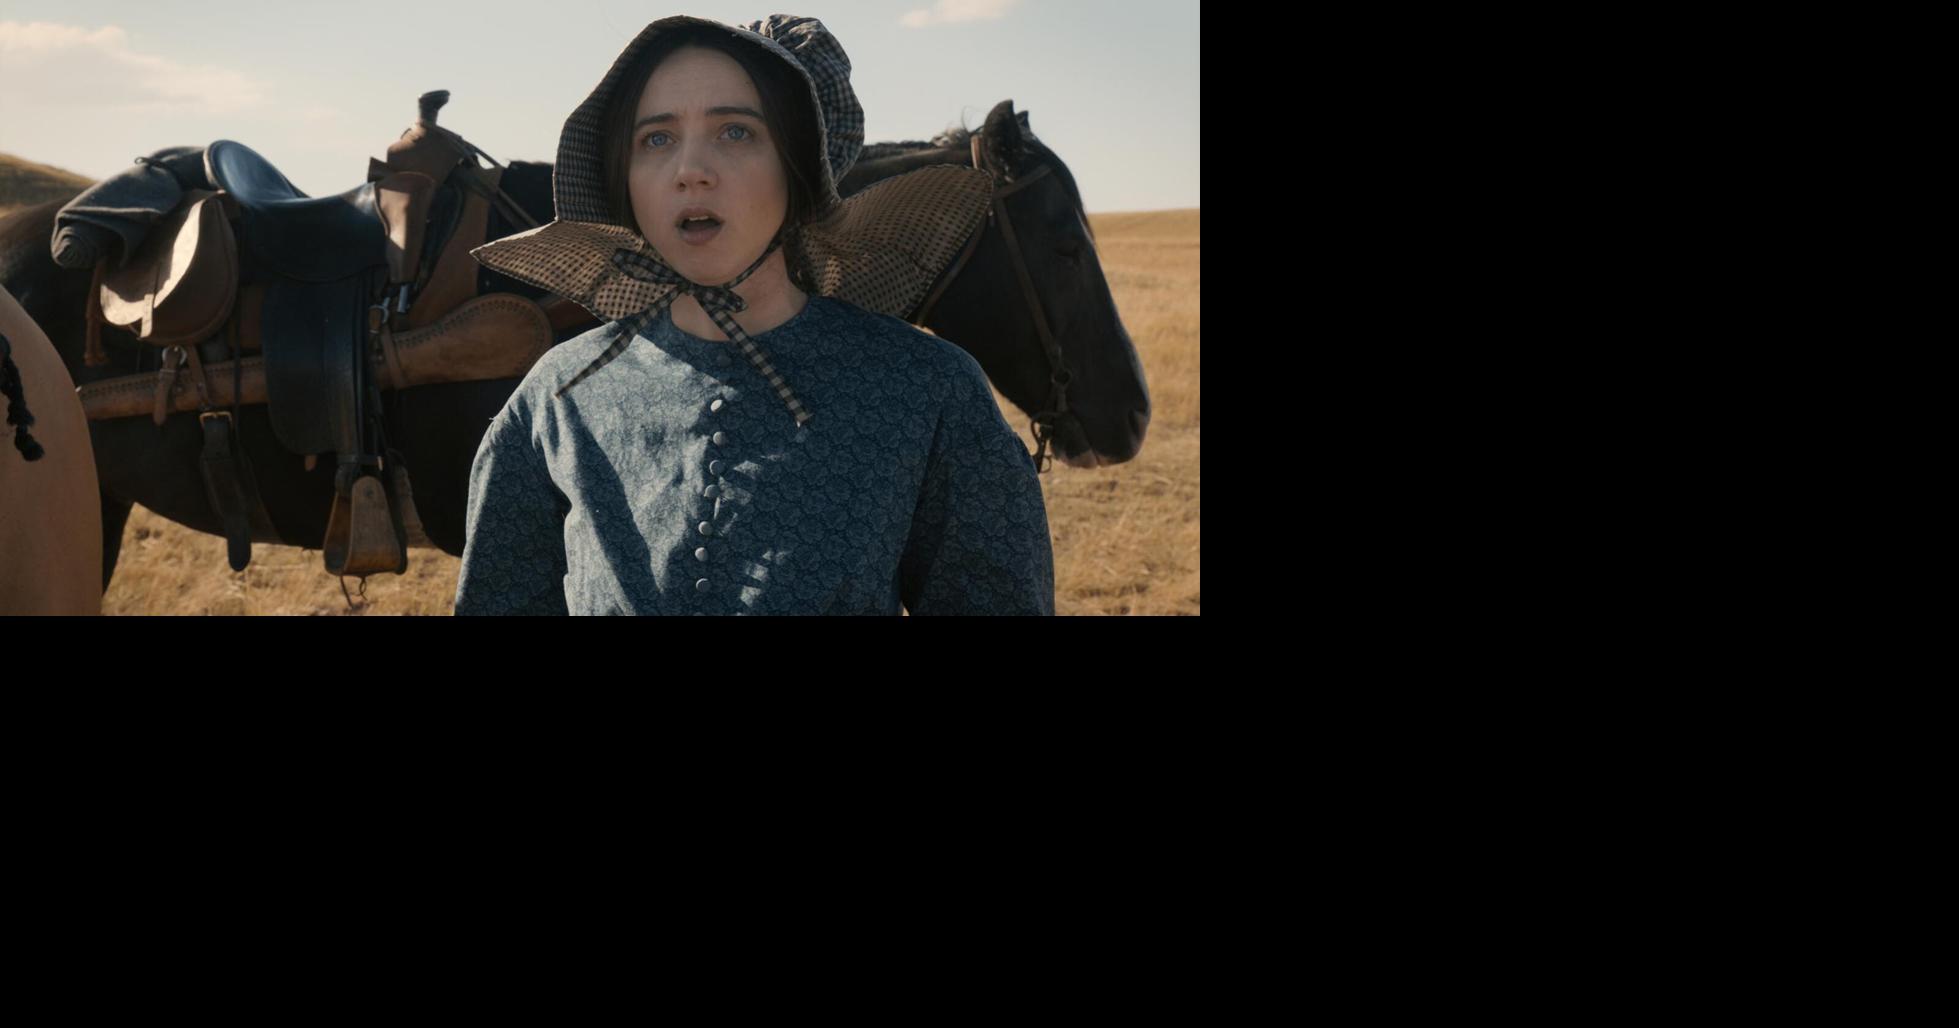 The Ballad of Buster Scruggs: 14 things you might have missed